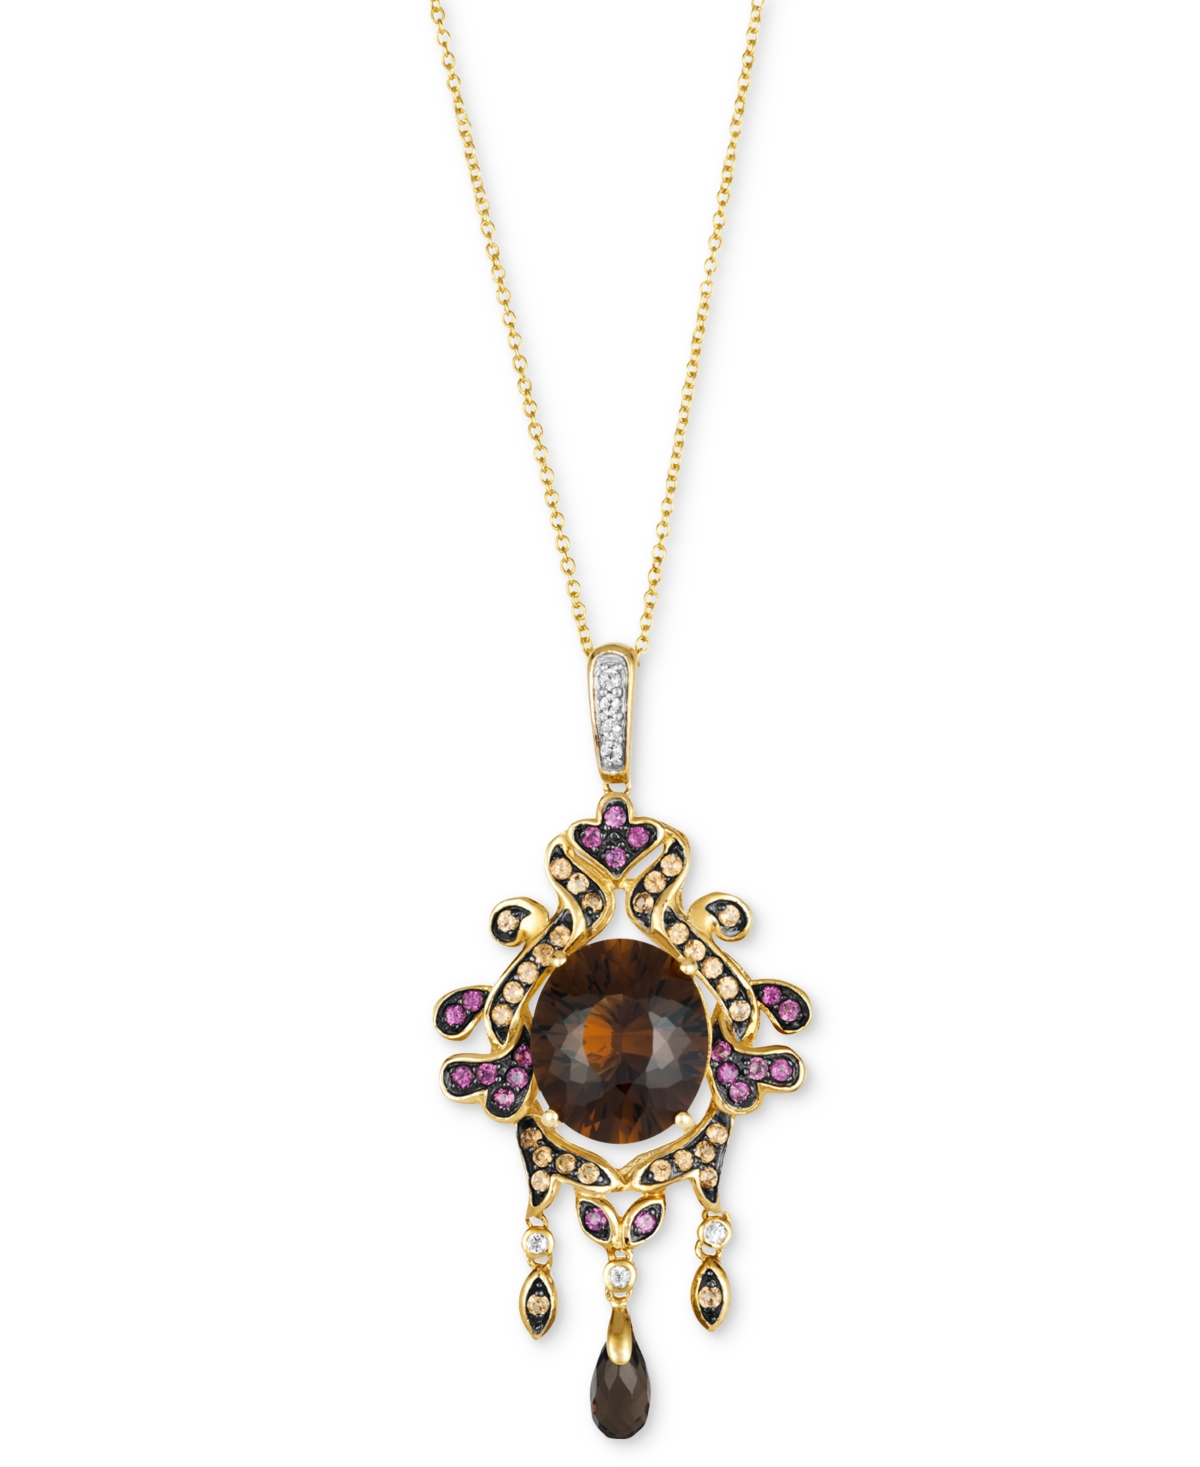 Multi-Gemstone Gothic Inspired 18" Pendant Necklace (8 ct. t.w.) in 14k Gold